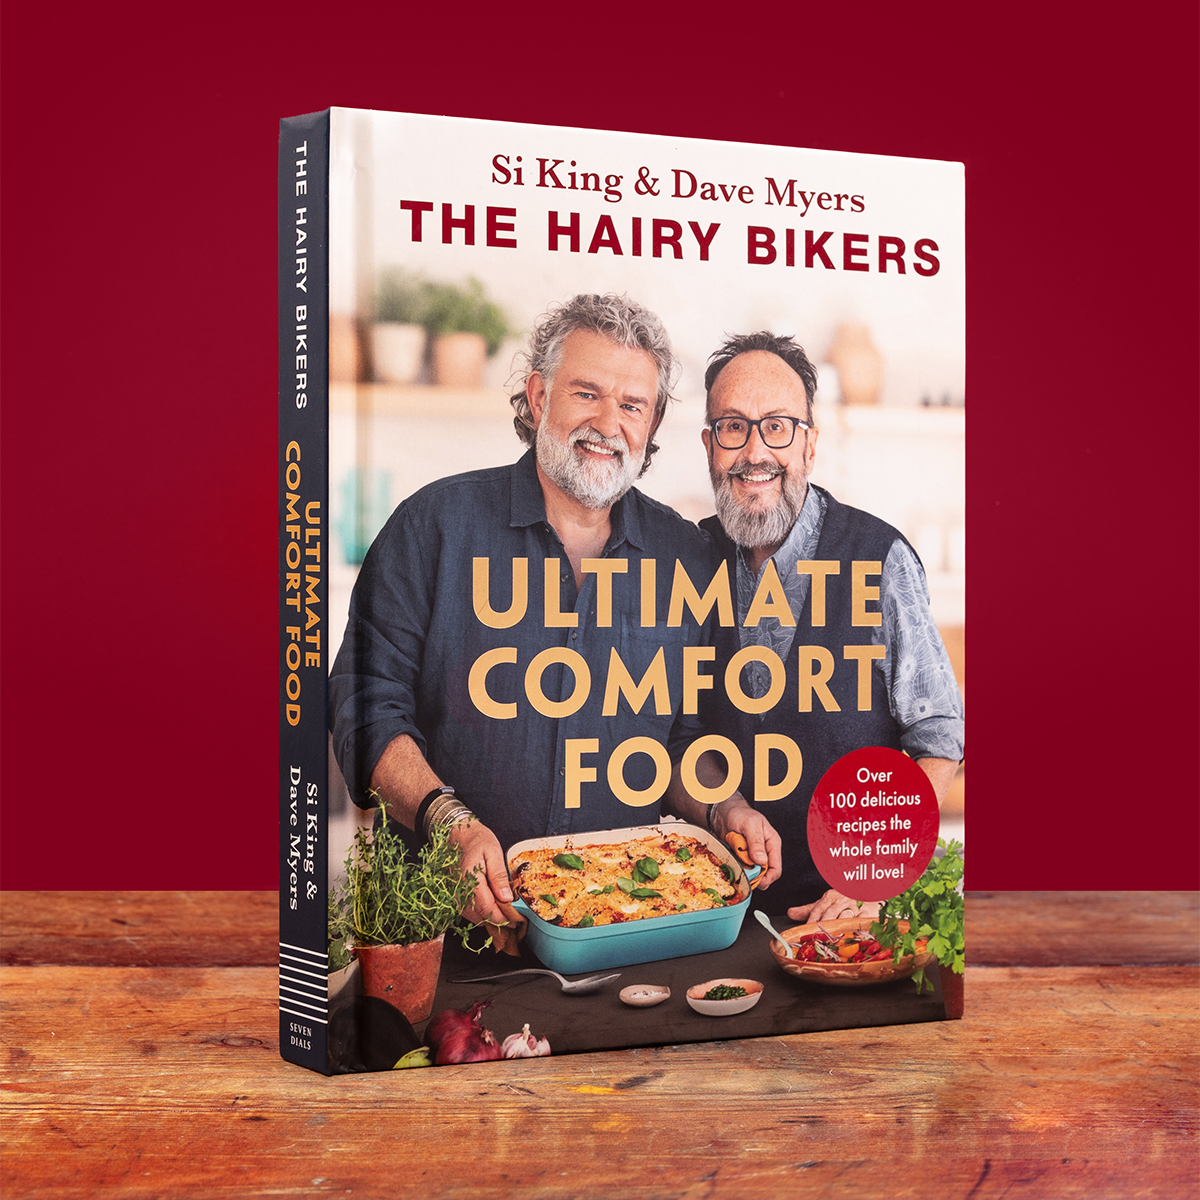 Enjoying The @HairyBikers new show #GoWest? 📺 If you're feeling inspired to get cooking in the kitchen, check out their latest cookbook #UltimateComfortFood - packed full of delicious recipes for you to enjoy geni.us/UltimateComfort